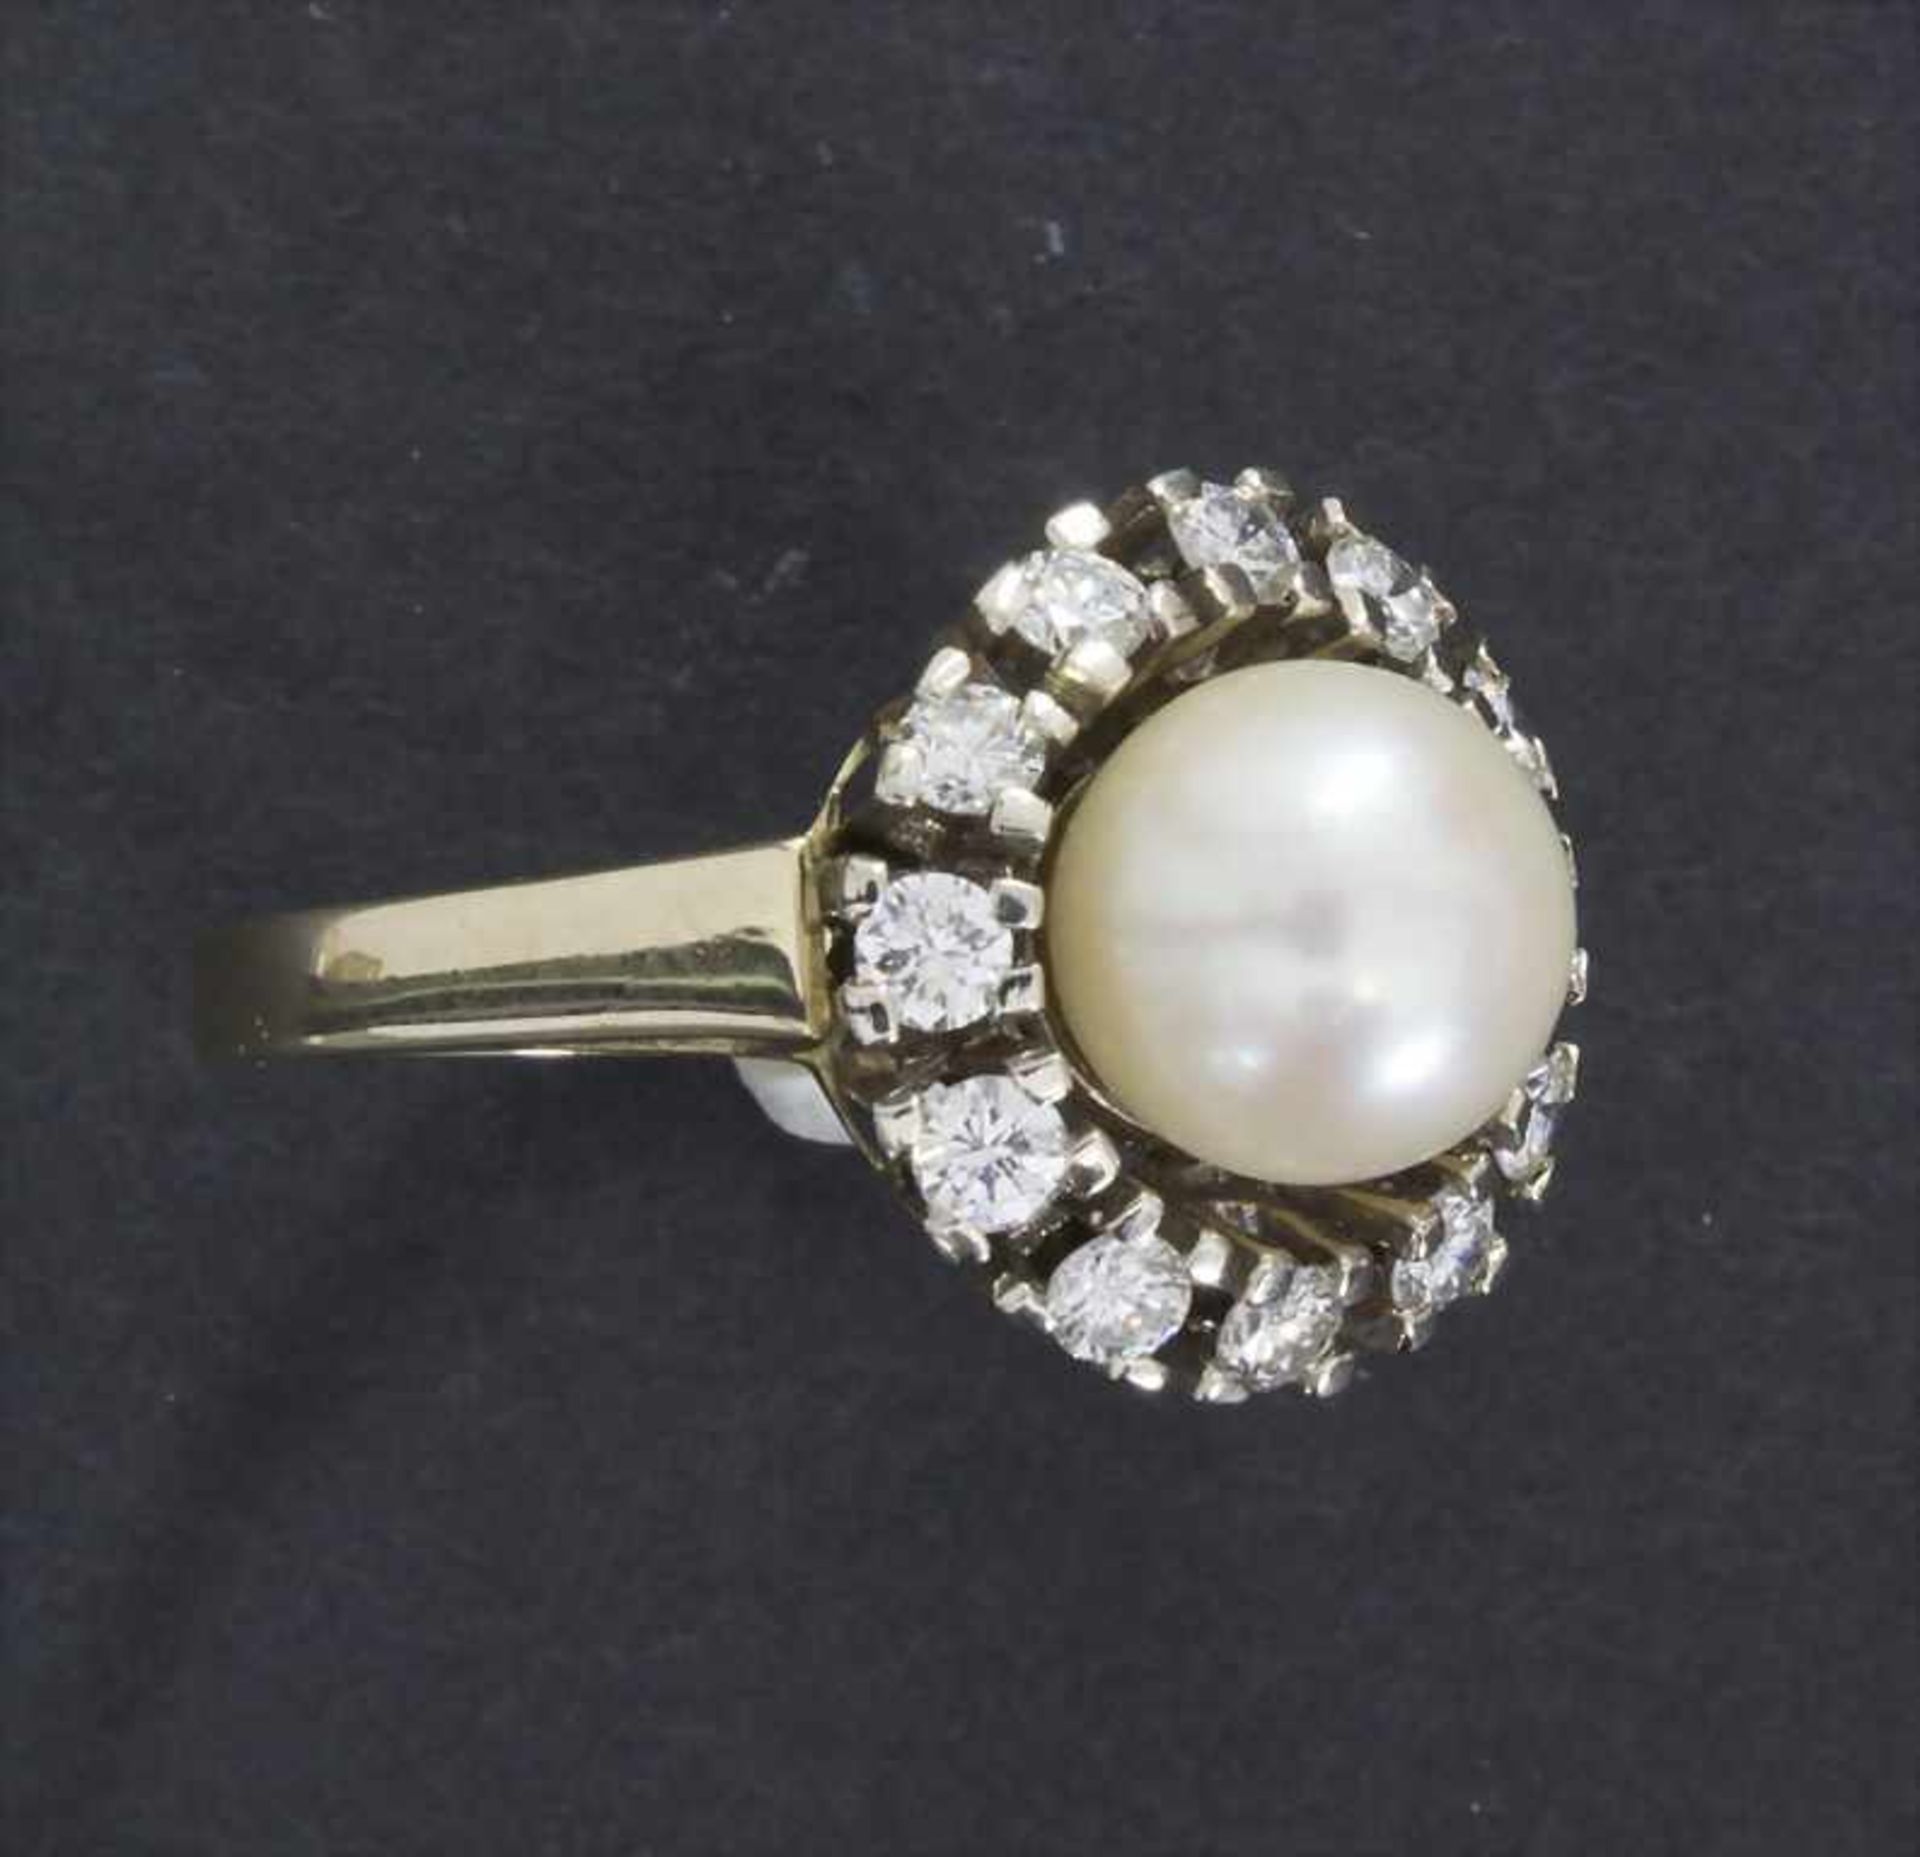 Damenring mit Brillanten und Perle / A ladies ring with brilliants and pearl - Image 2 of 3